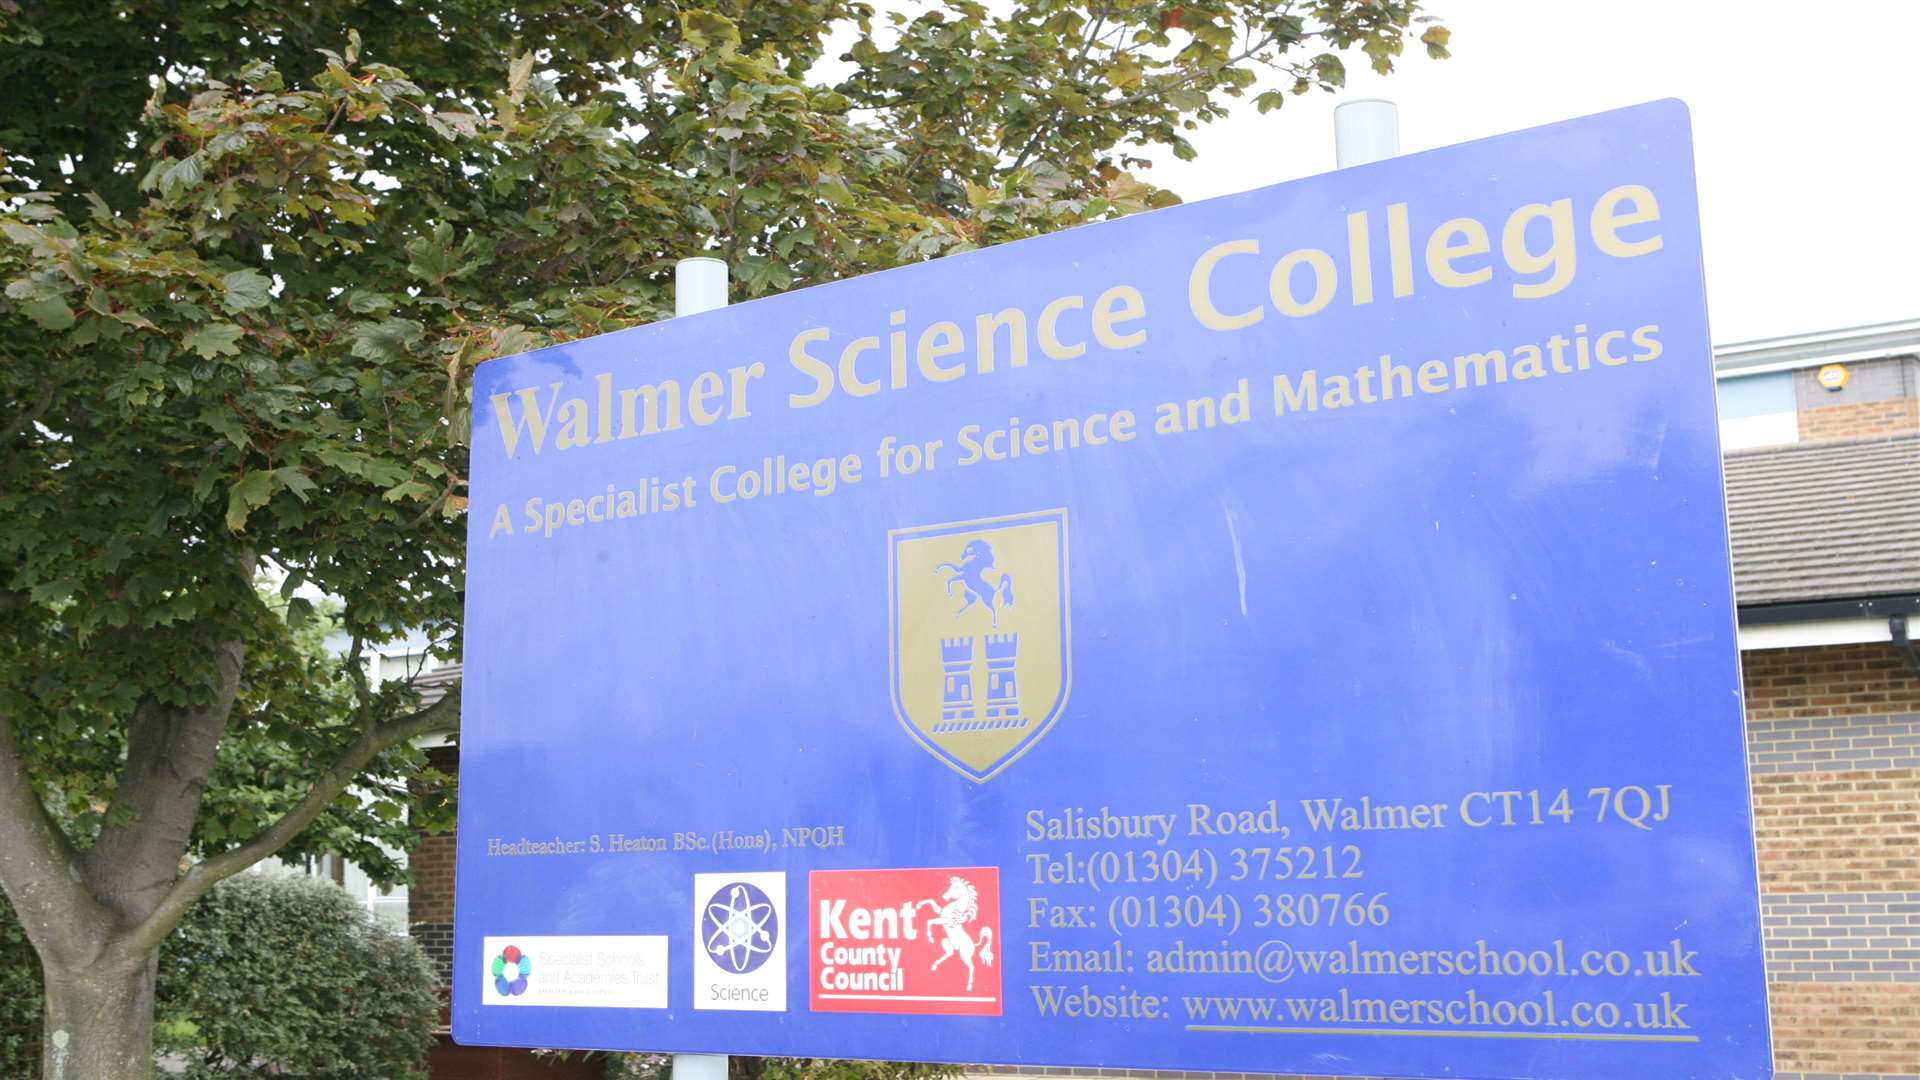 KCC has committed to retaining the Walmer Science College site for educational use